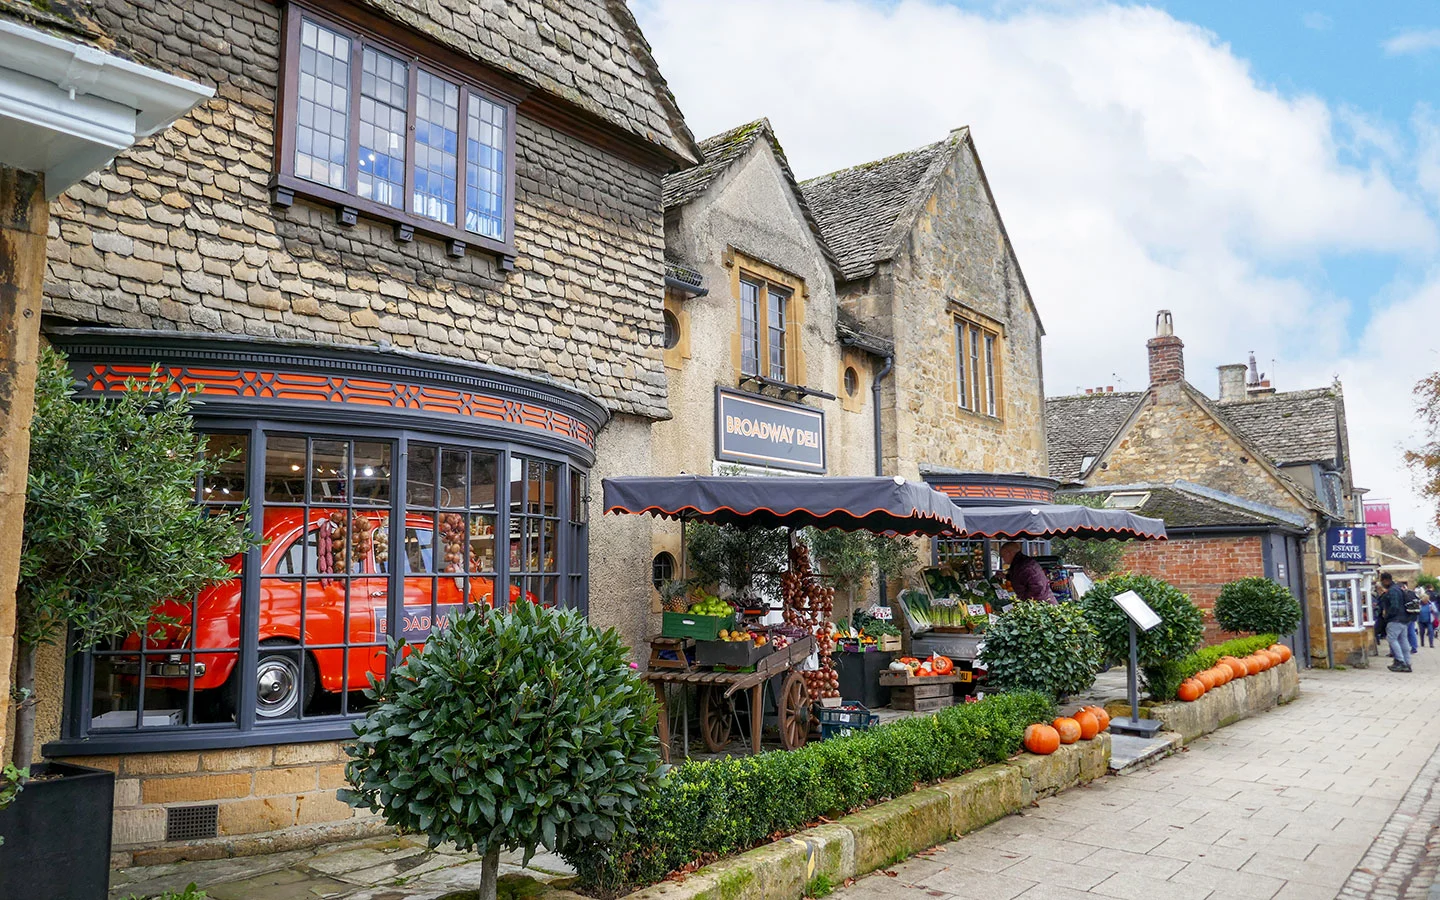 Autumn at the Broadway Deli in the Cotswolds